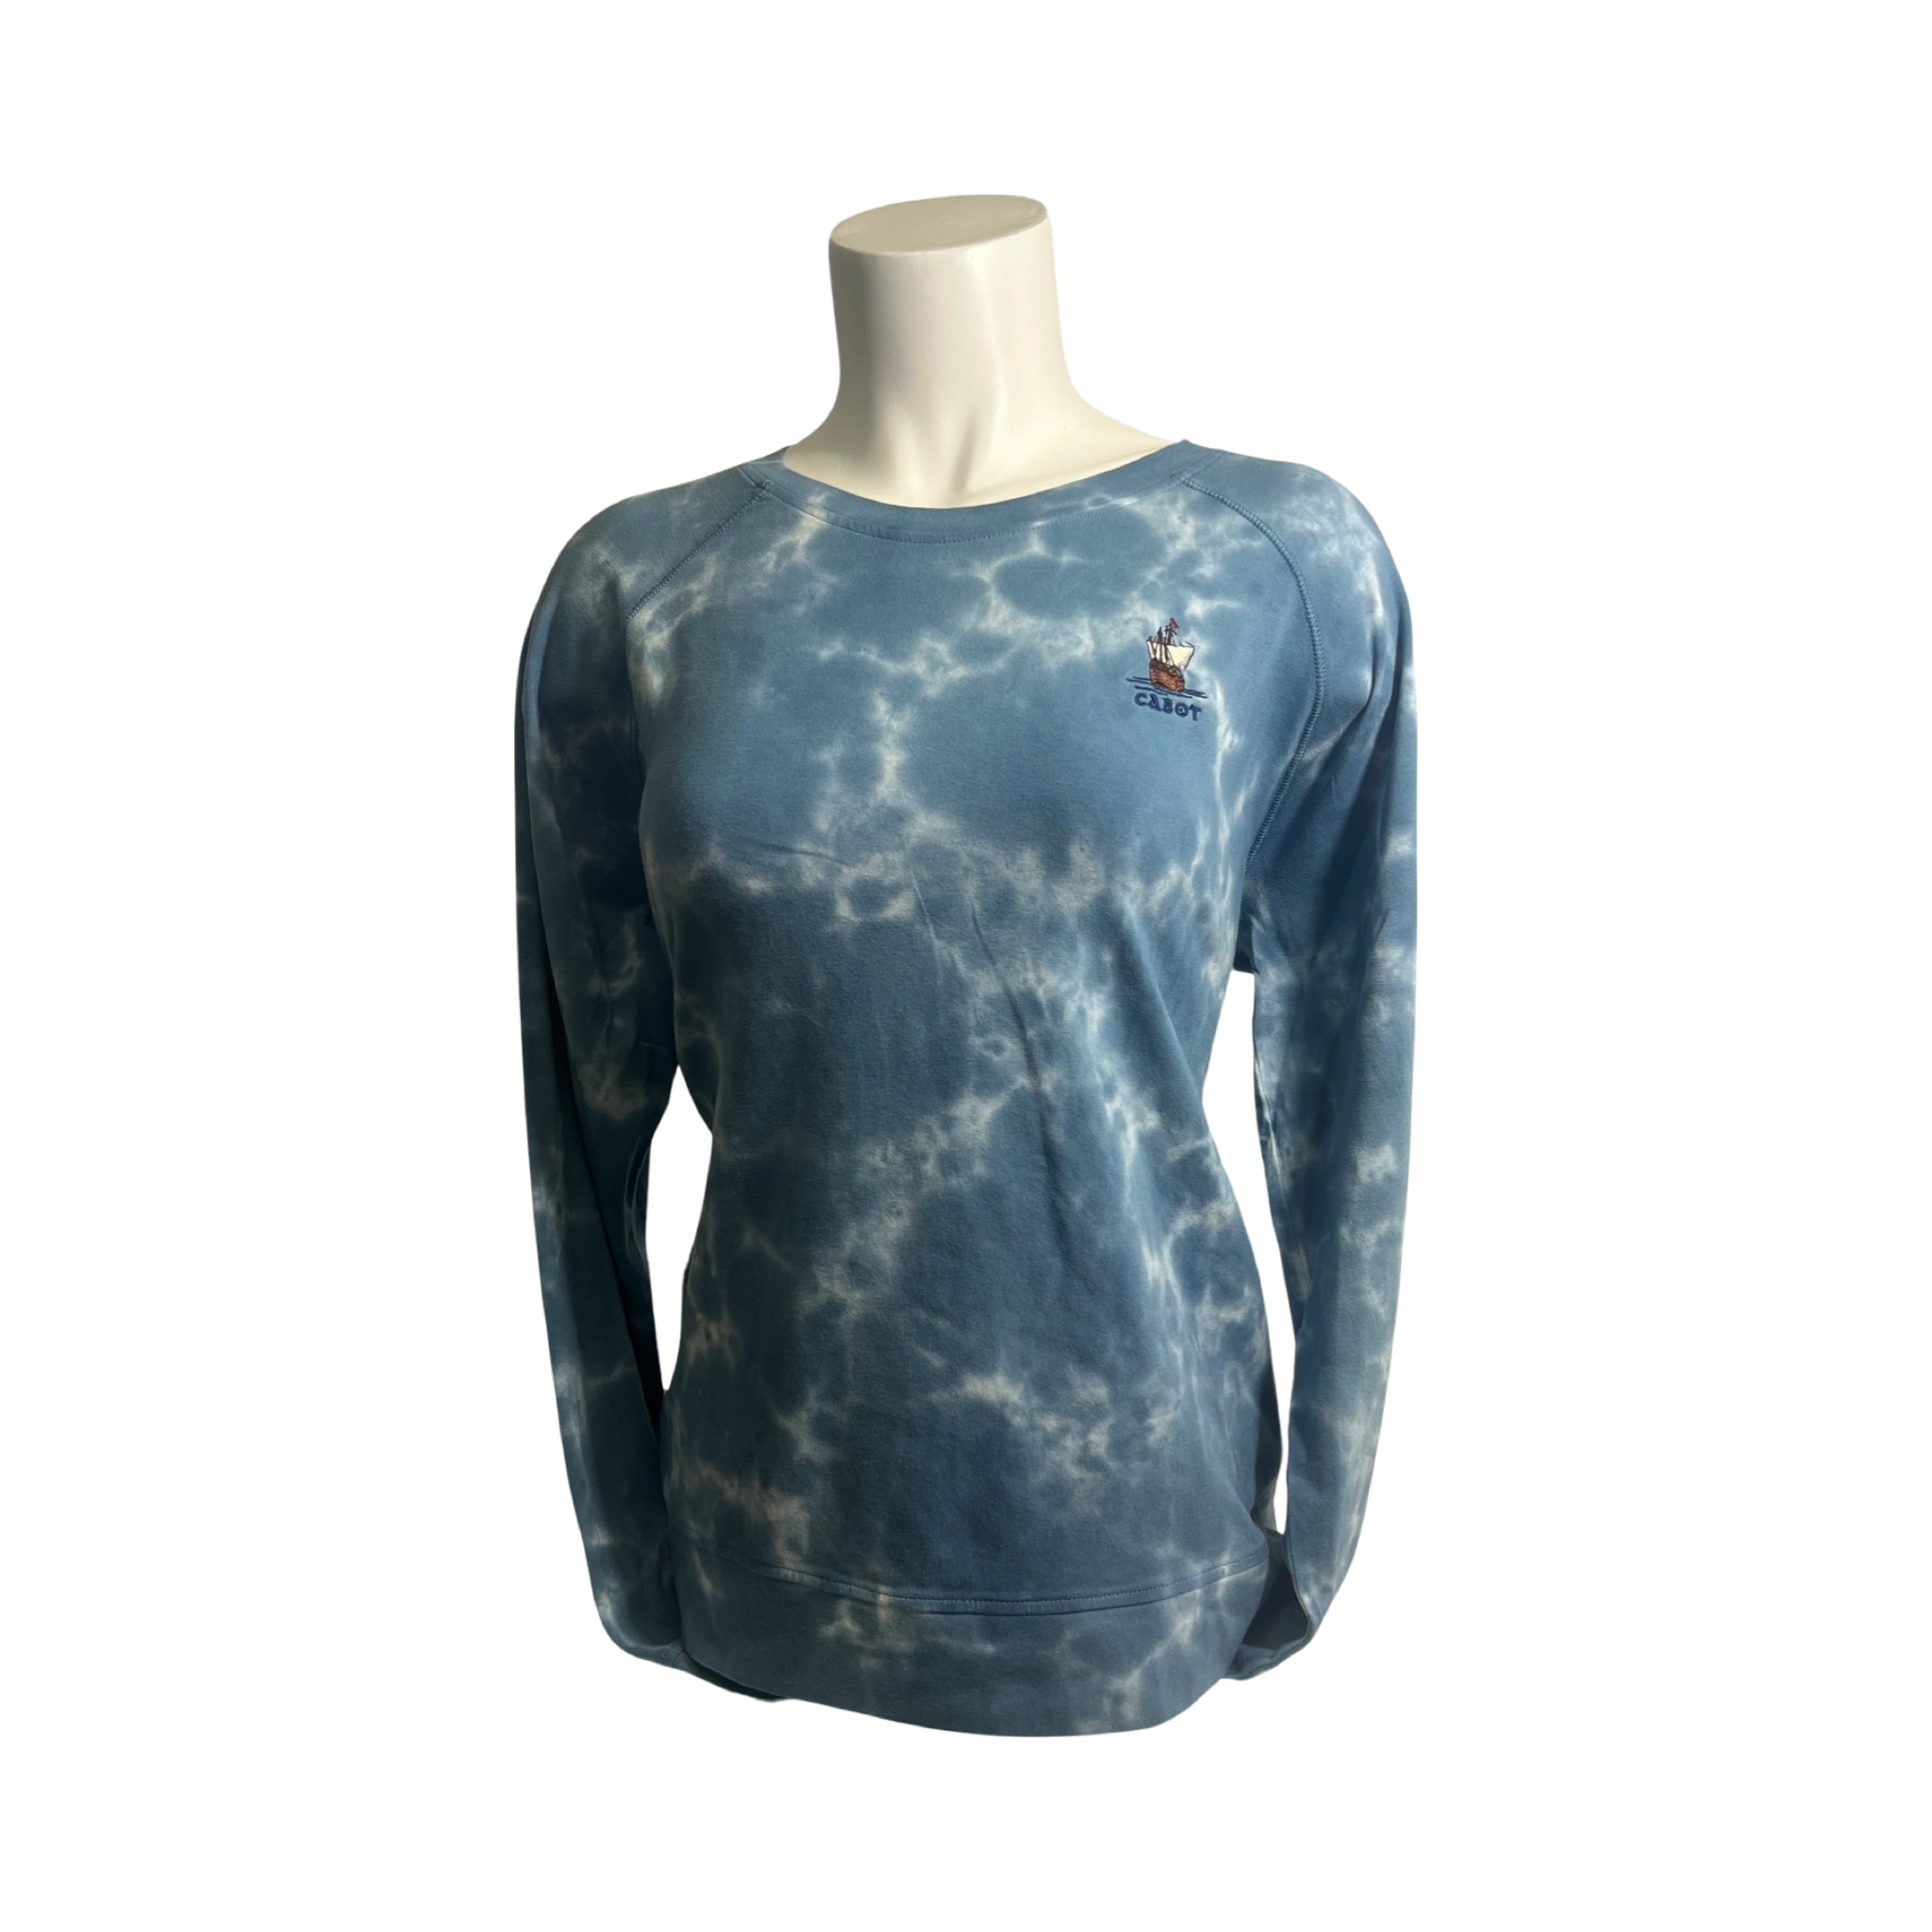 Peter Millar Cabot Links Women's Lava Washed Tie Dye Pullover